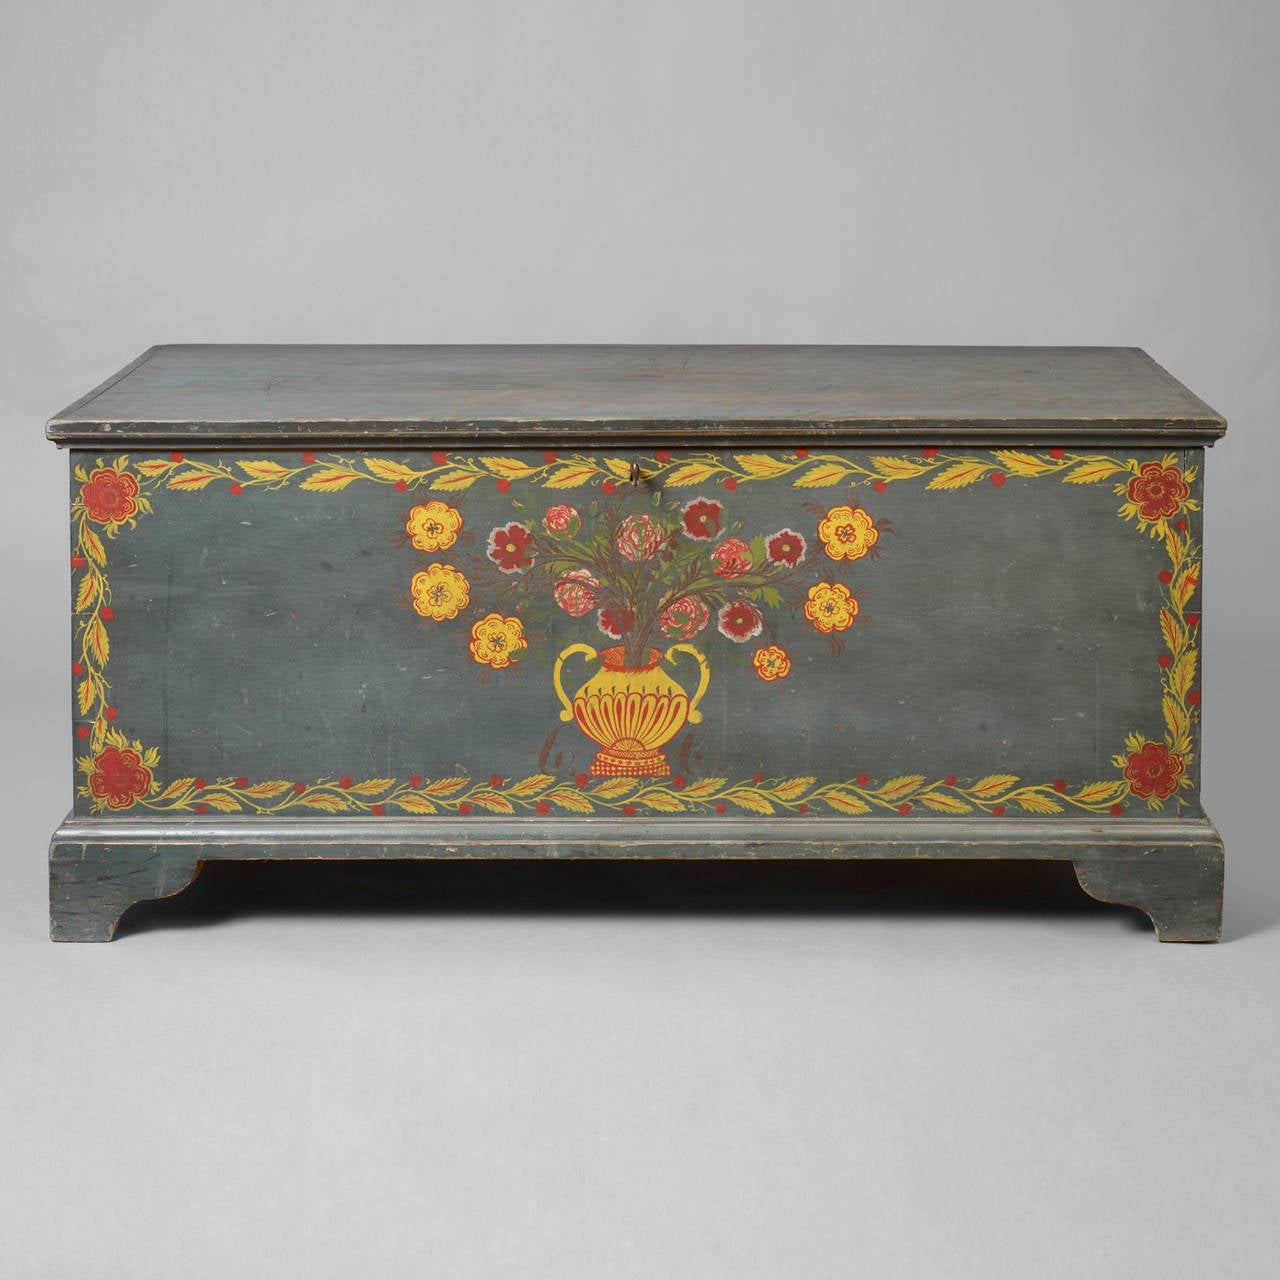 American. Schoharie or Albany County, New York, circa 1815-1830.
Pine, paint decorated, iron hinges.
Condition: Minor imperfections such as abrasions with very minor in-painting. The blanket chest has survived in a remarkable state of